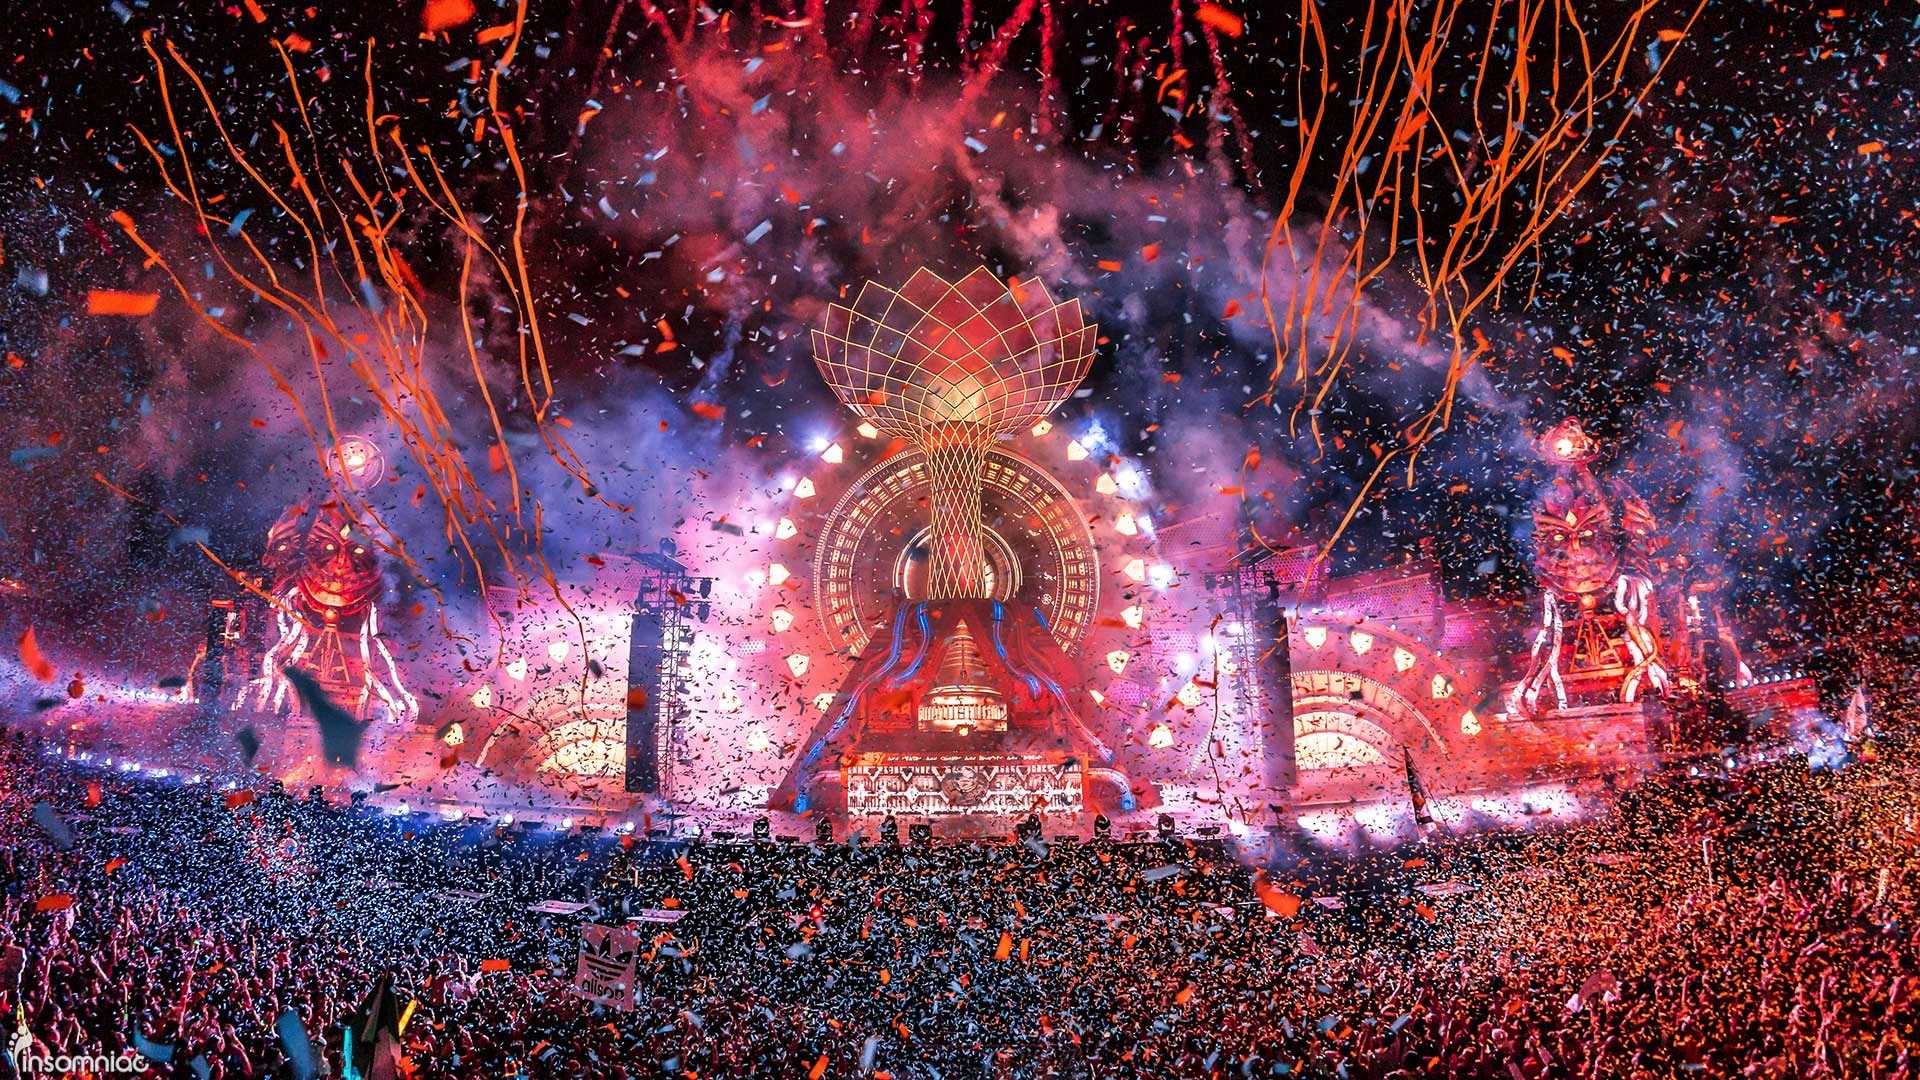 1920x1080 ... red bull tv announces full lineup for edc lv 2017 broadcast edm;  electric daisy carnival wallpapers wallpaperpulse ...